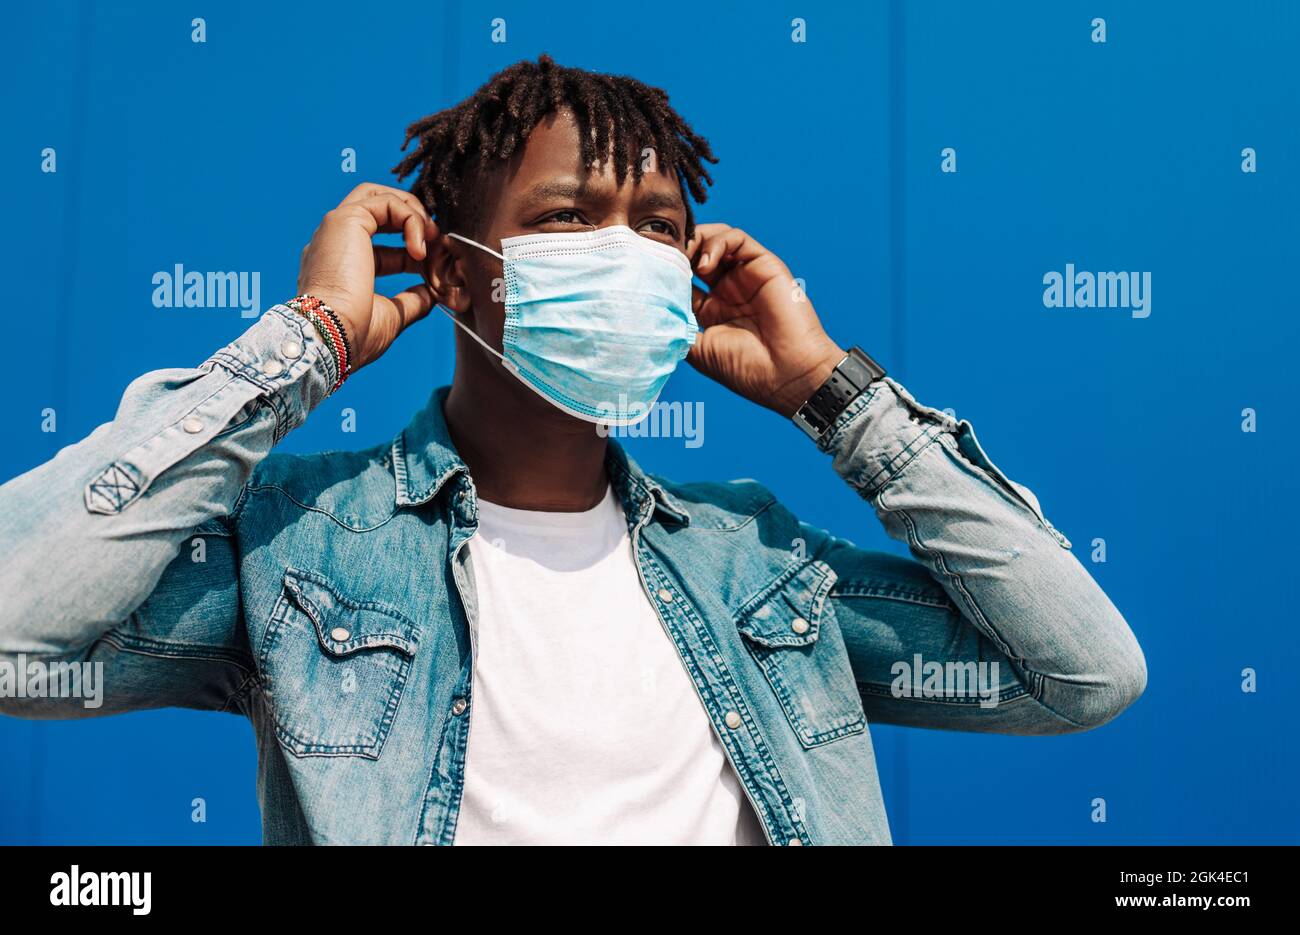 portrait of an afro american black man wearing a protective mask against coronavirus, on a blue background, guy puts a mask on his face Stock Photo